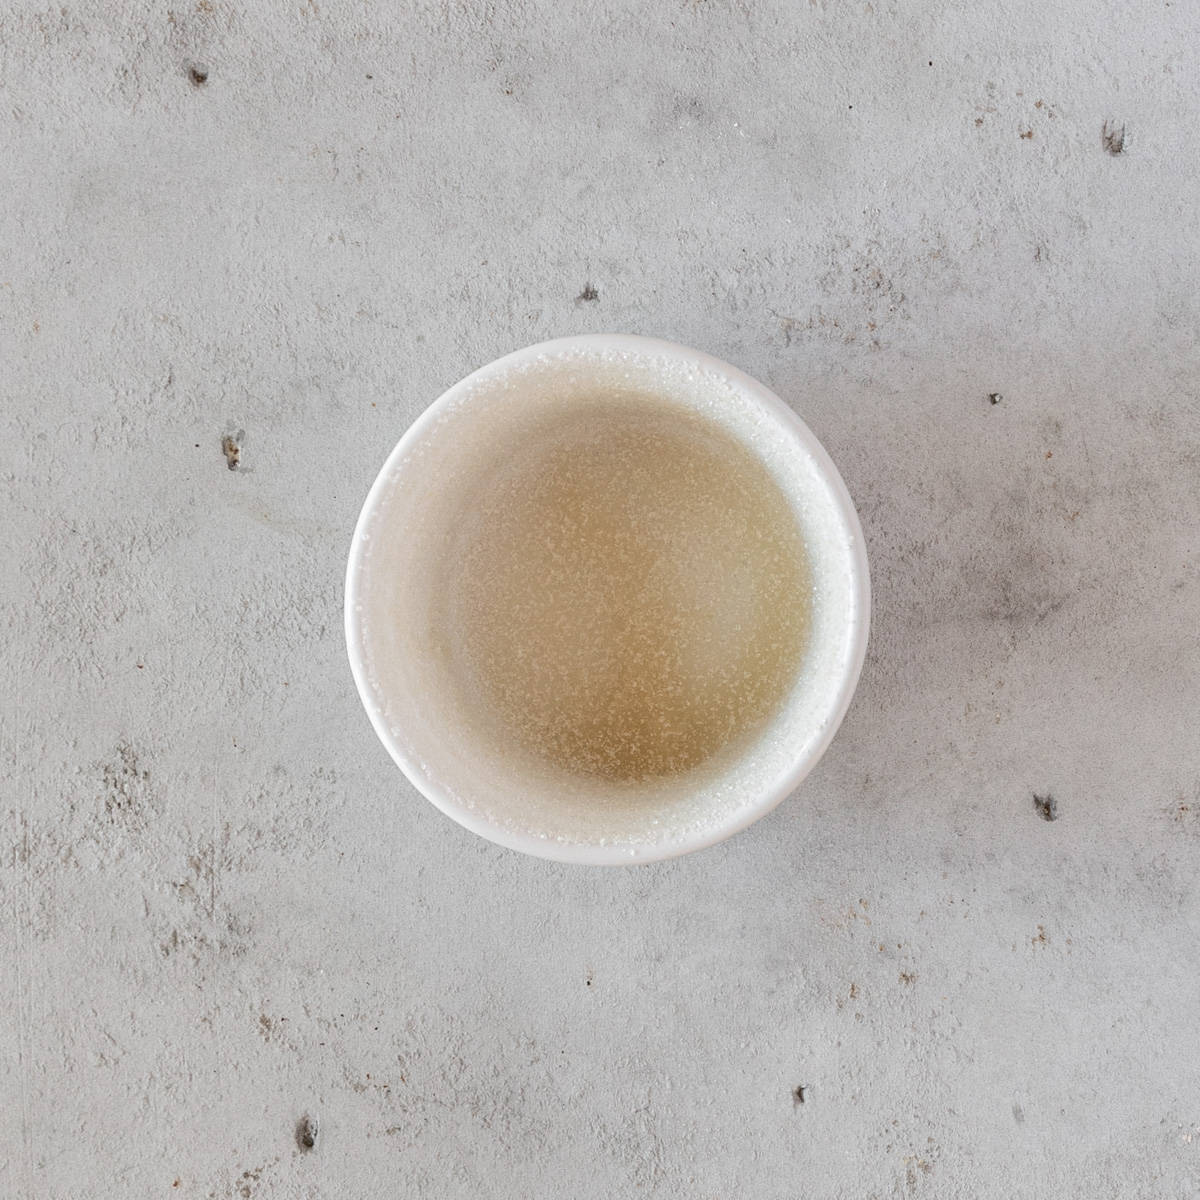 a ramekin that has been oiled and coated with sugar on a grey background.